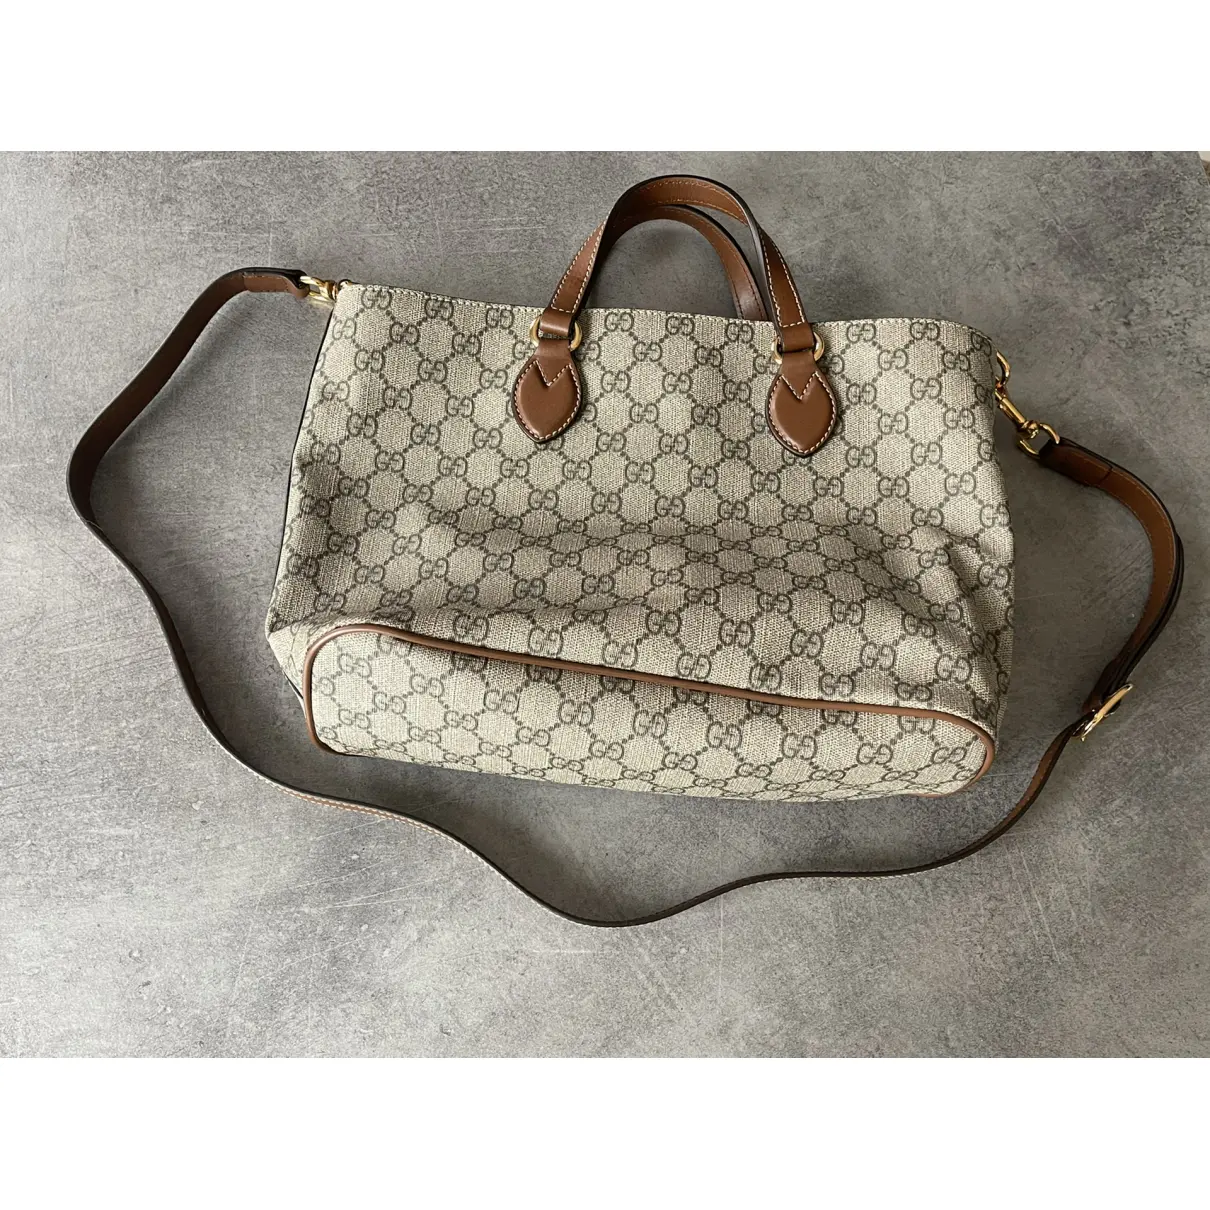 Buy Gucci Cloth tote online